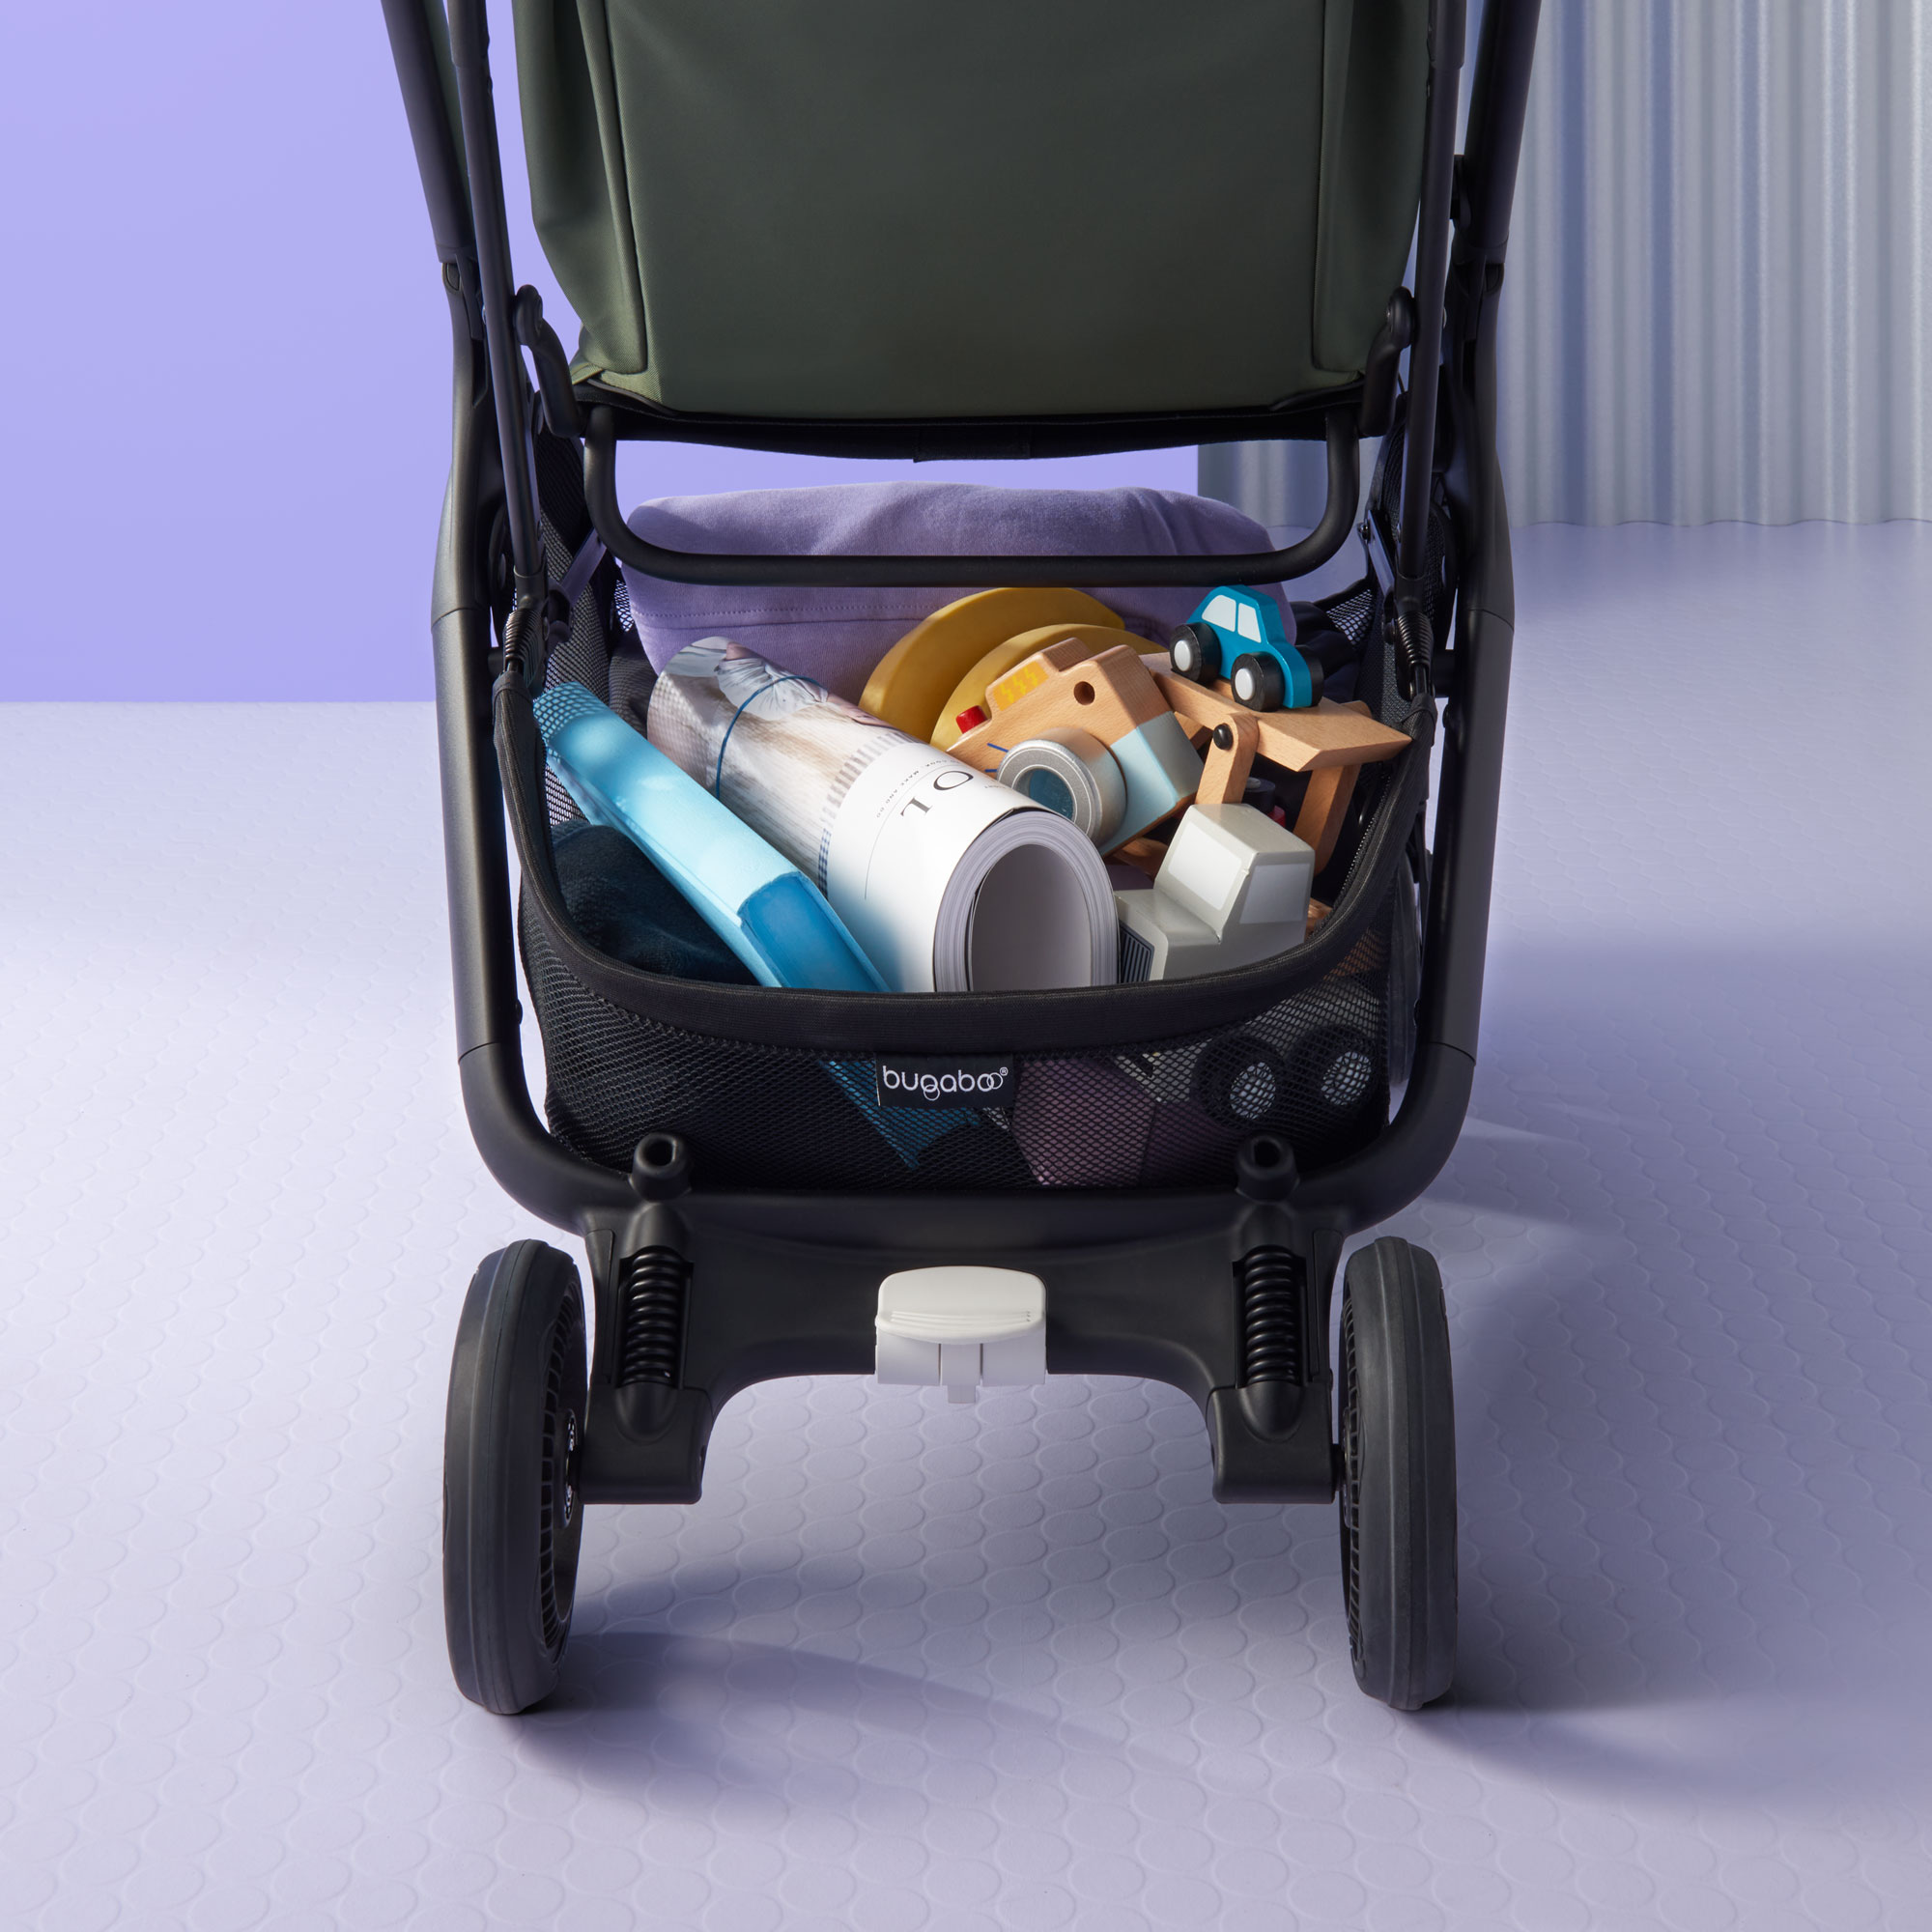 Bugaboo 2015 Runner Seat and Canopy in Petrol Blue 